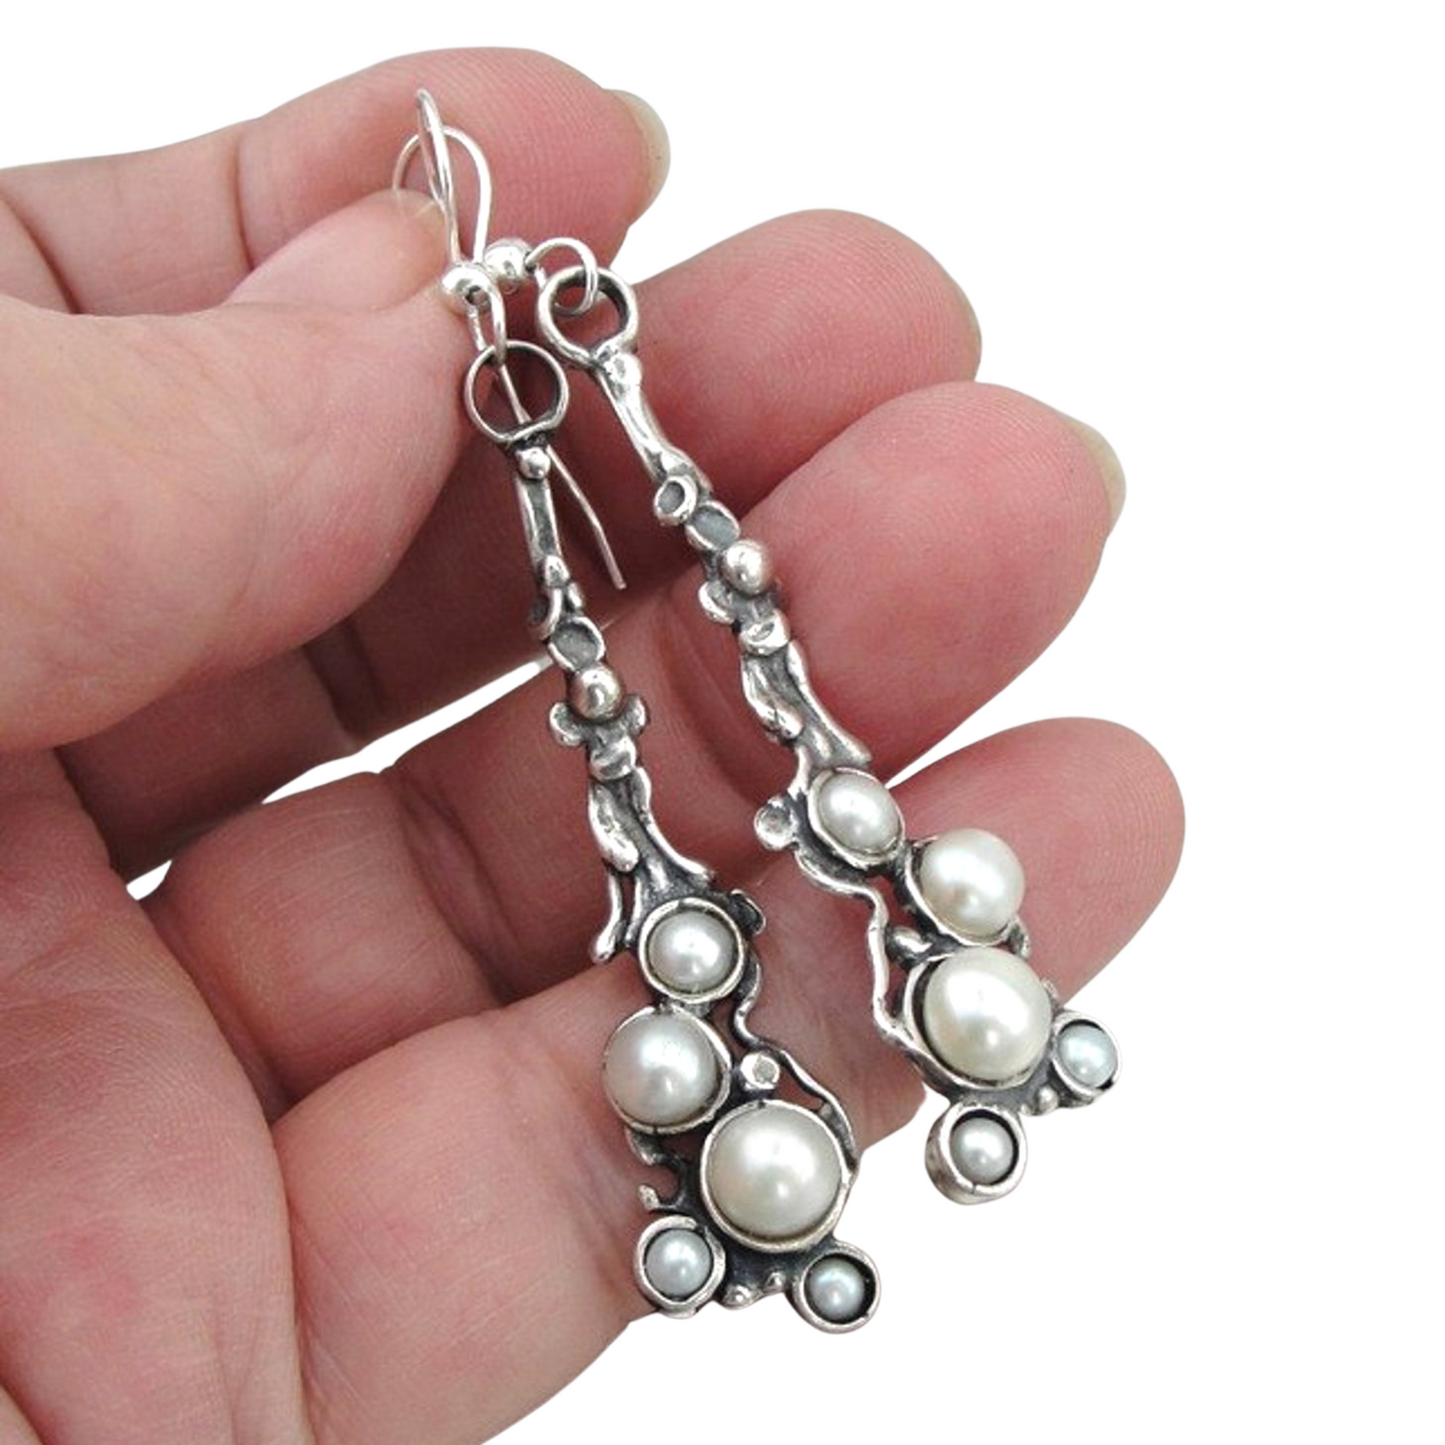 Long sterling silver earrings decorated with white natural pearls.